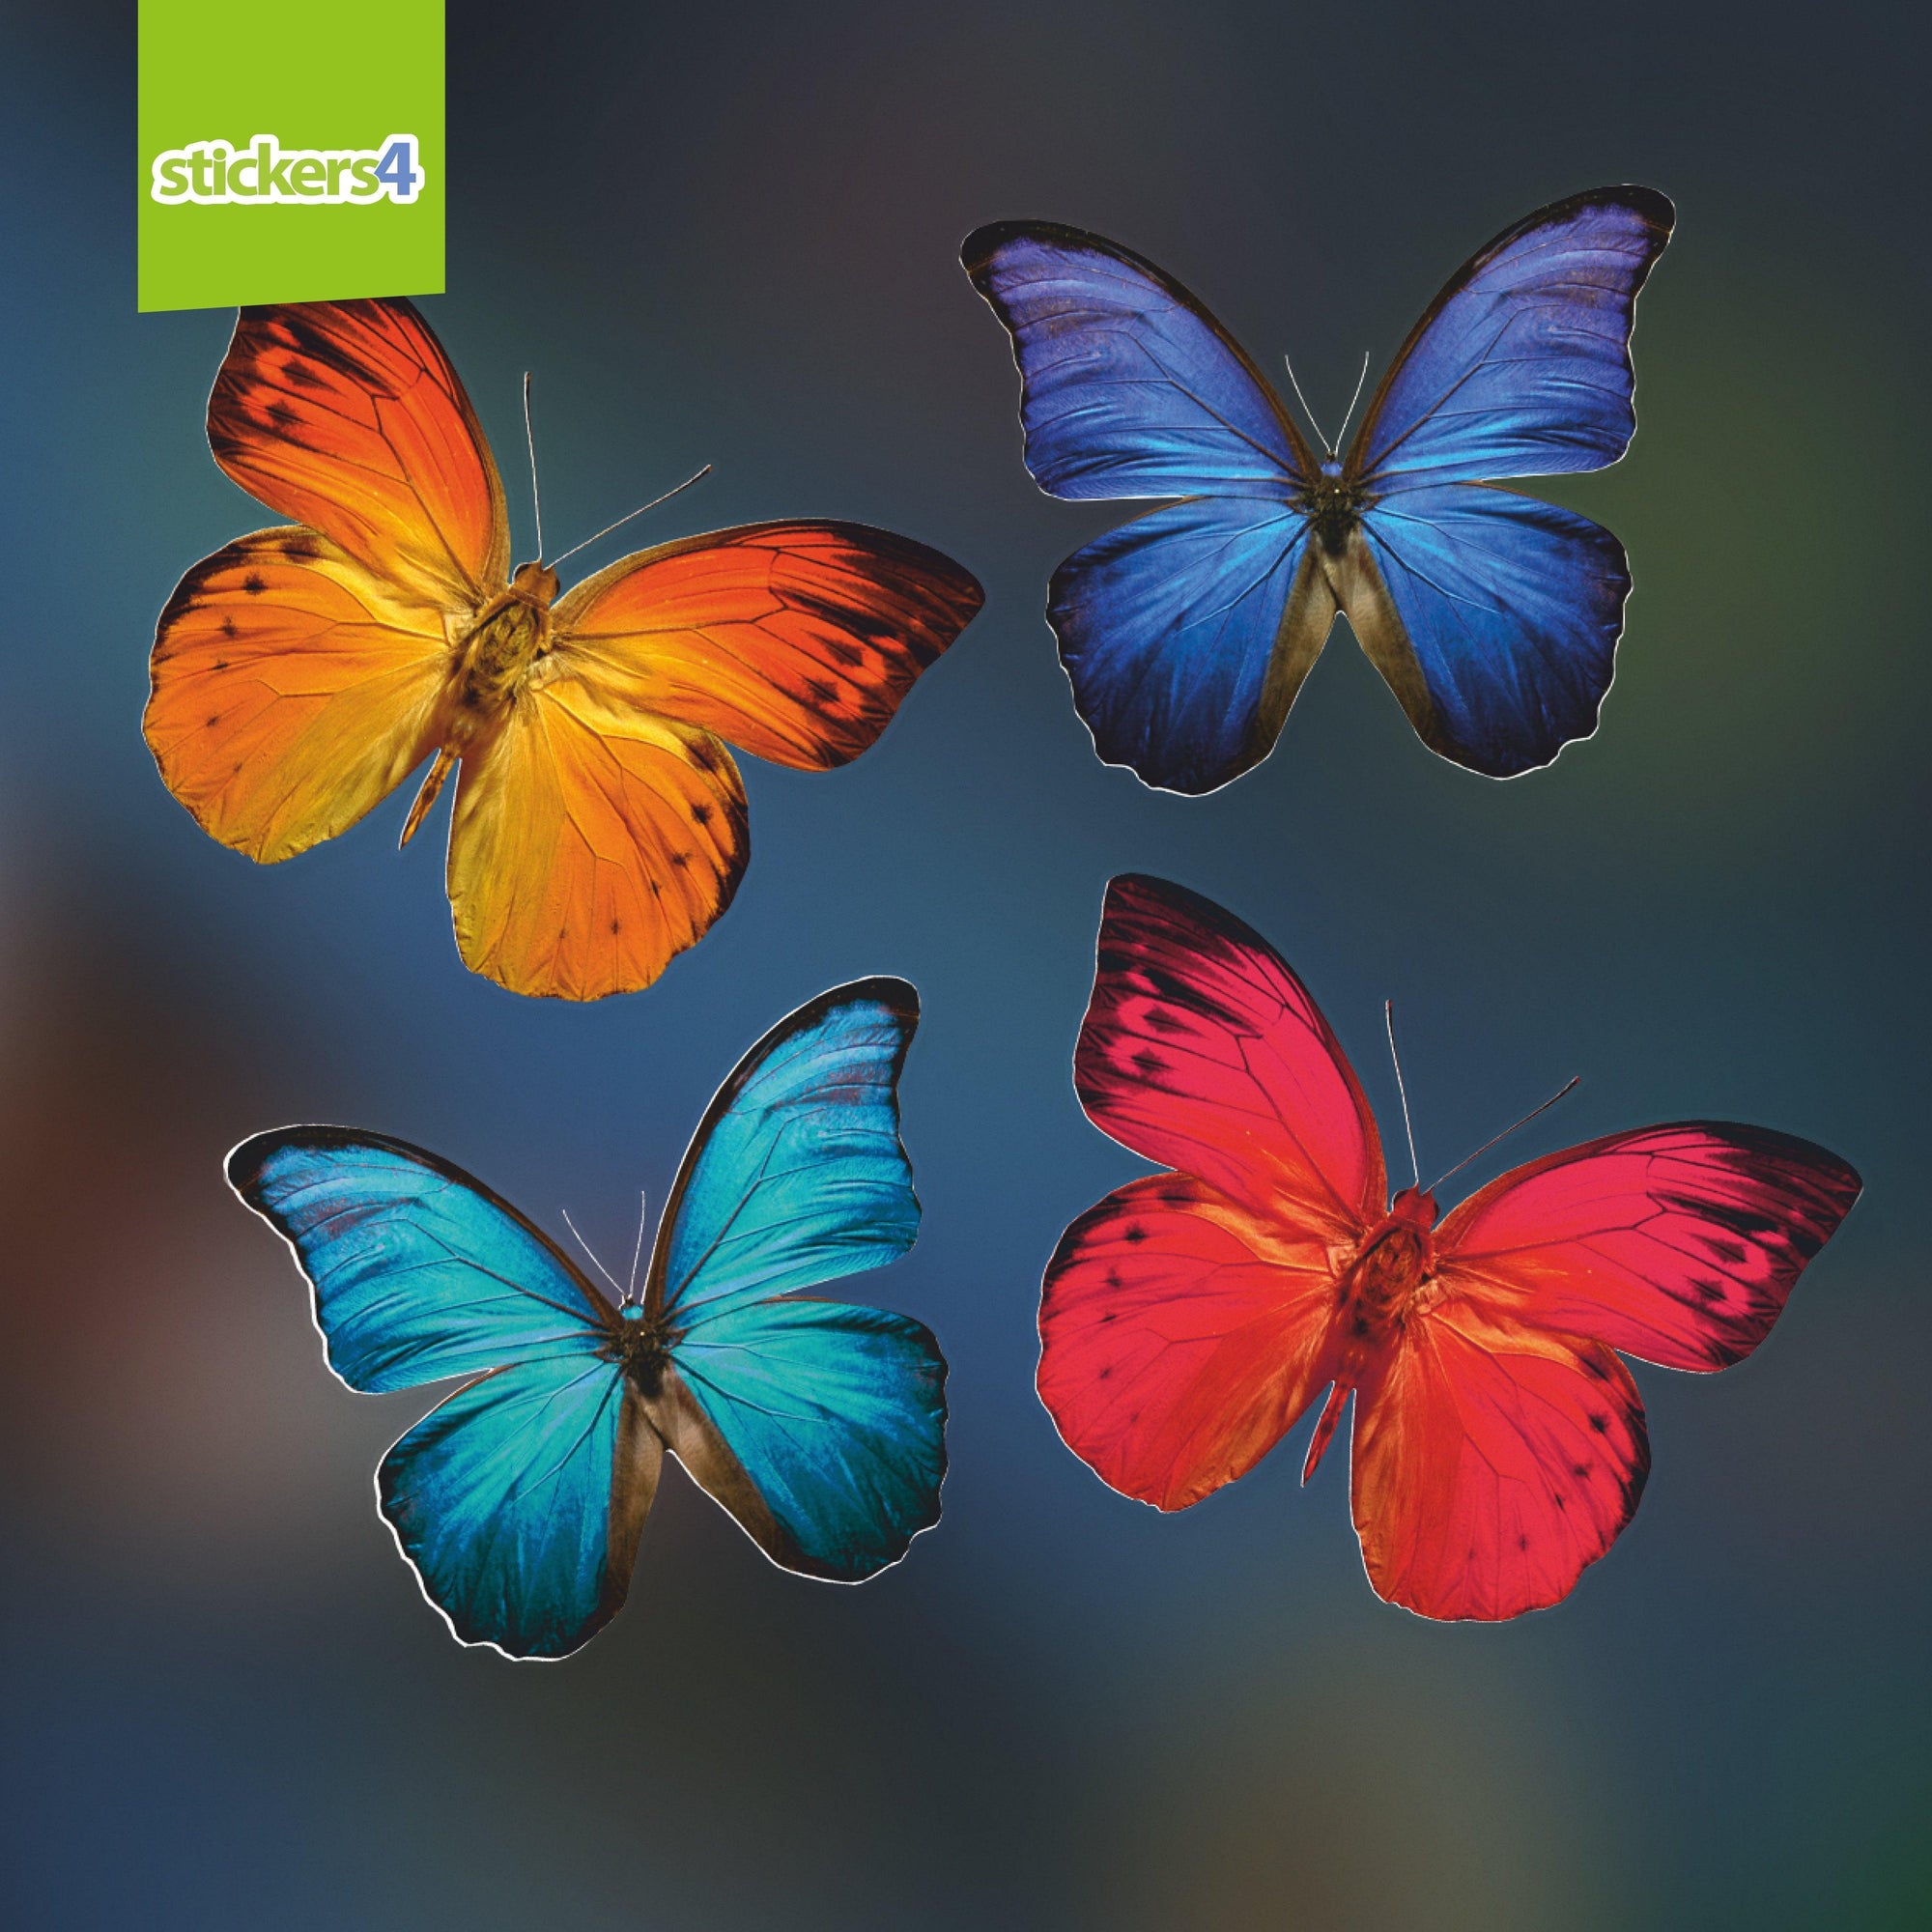 Large Colourful Butterfly Static Cling Window Stickers Decorative Bird Strike Prevention